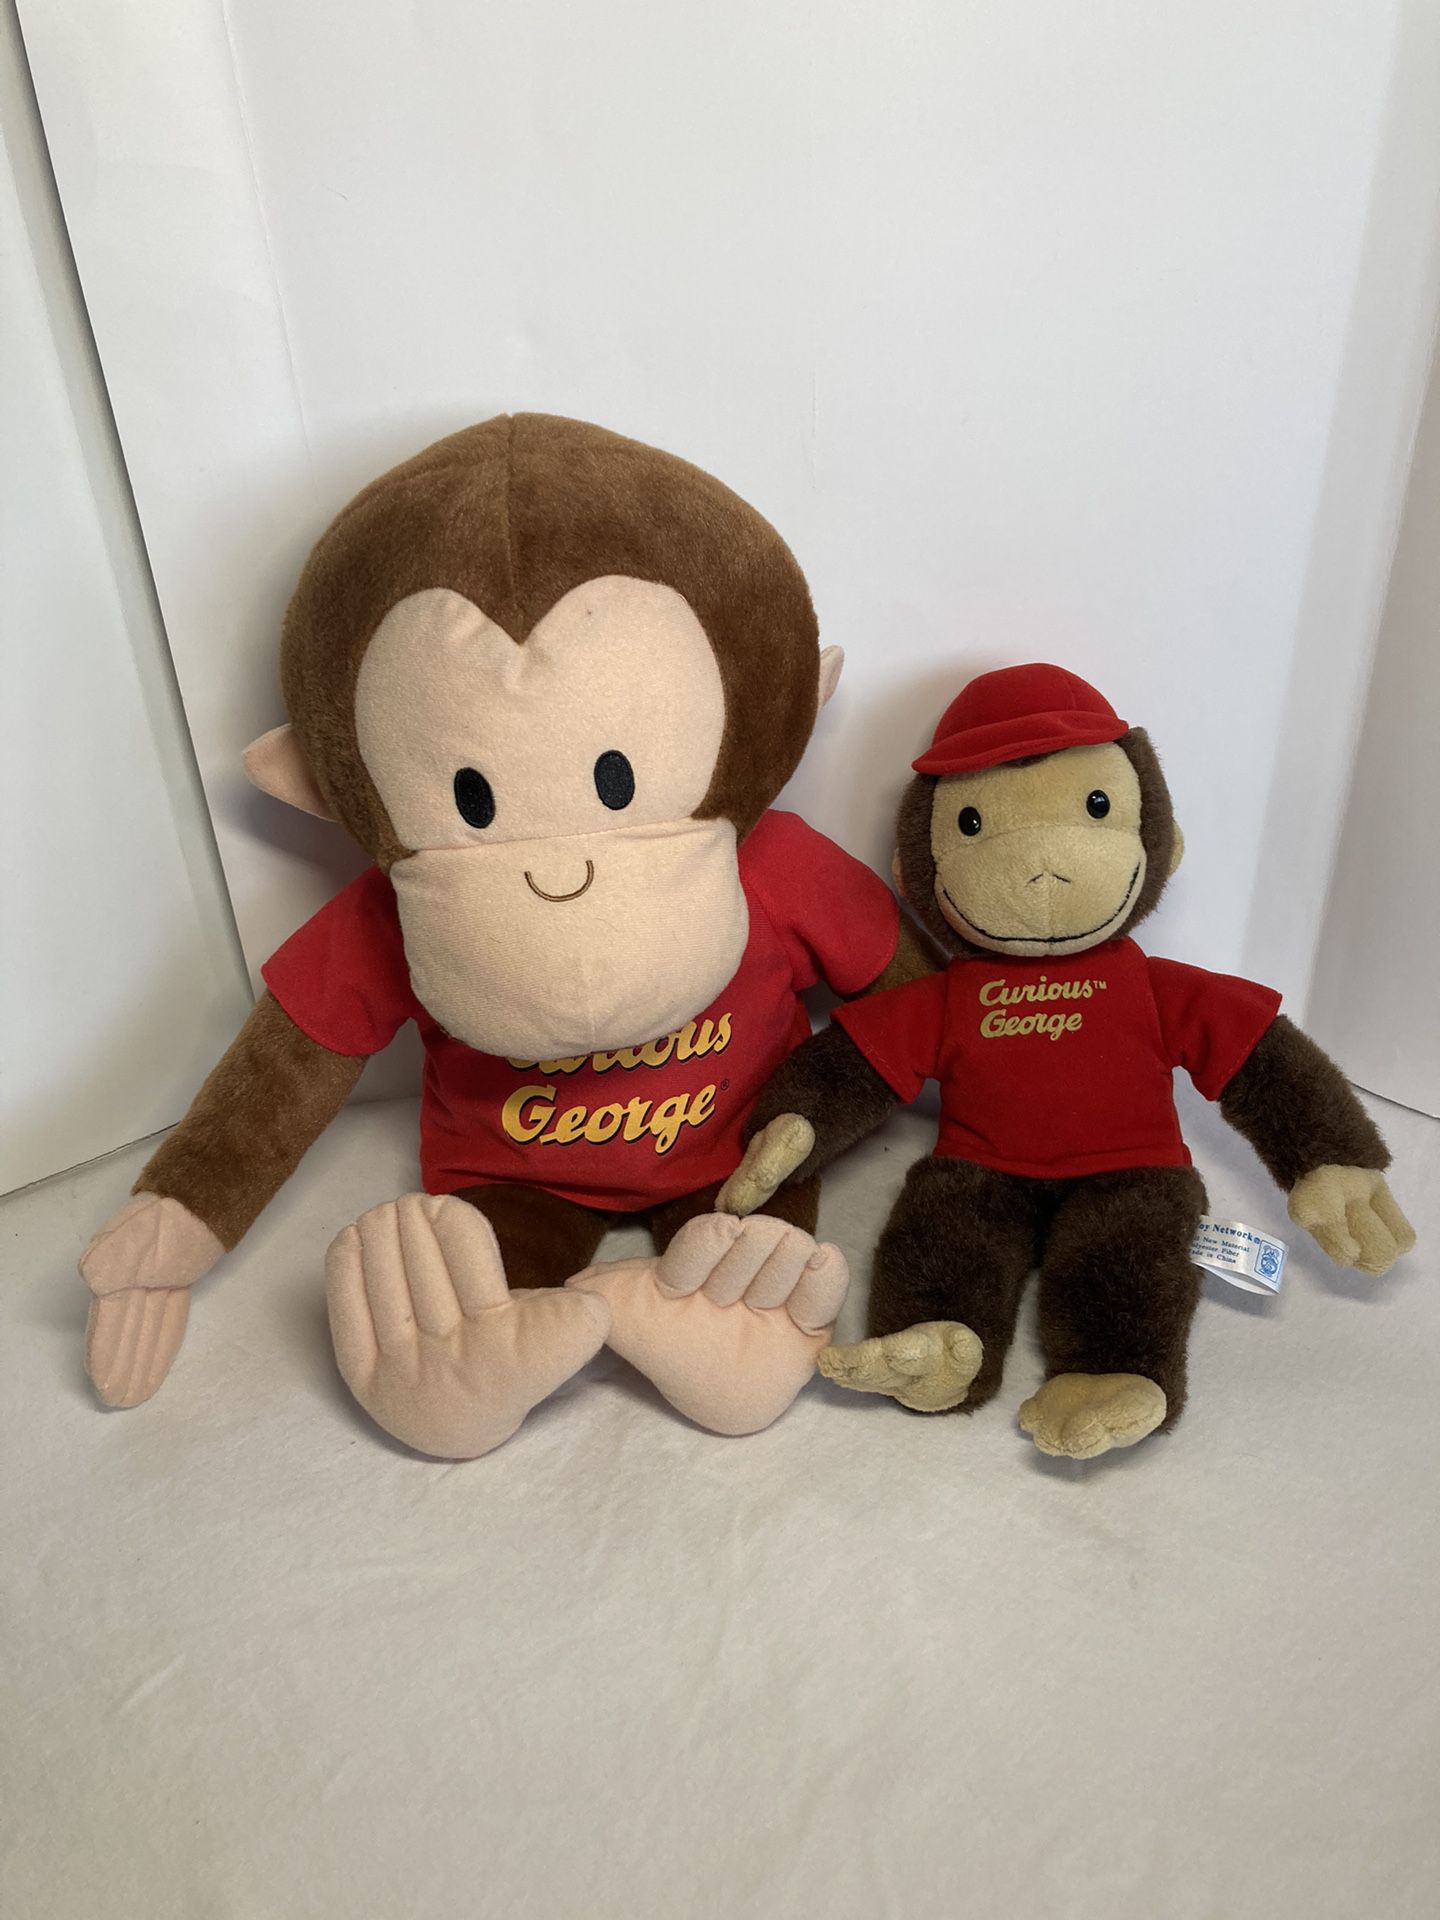 Two Curious George Stuffed Animal Plush Toy 12” and 9” Inch Toy Network